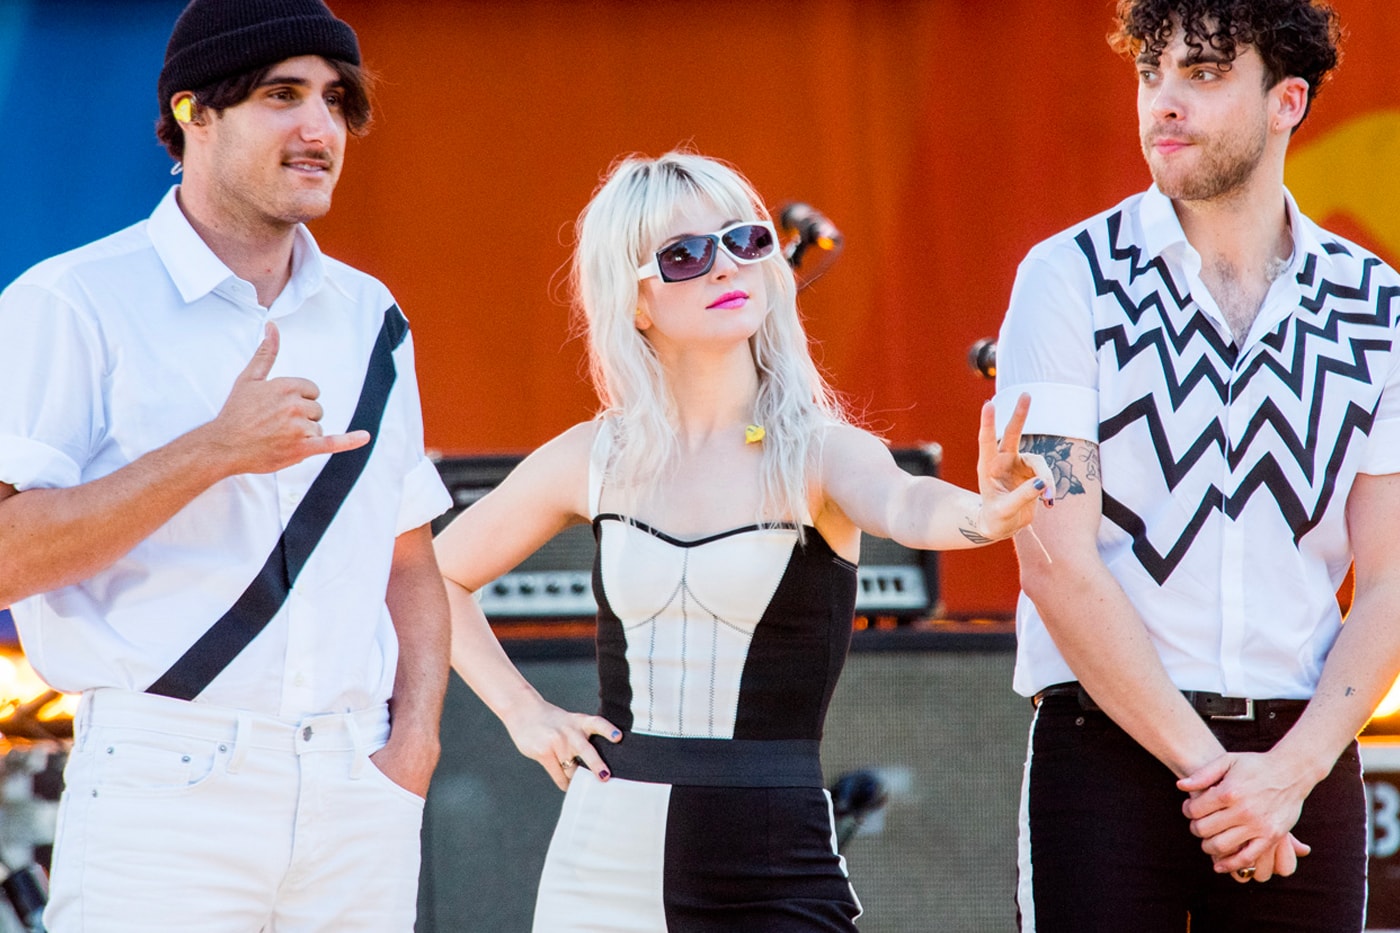 Paramore Announce “This Is Why,” First New Song in 5 Years